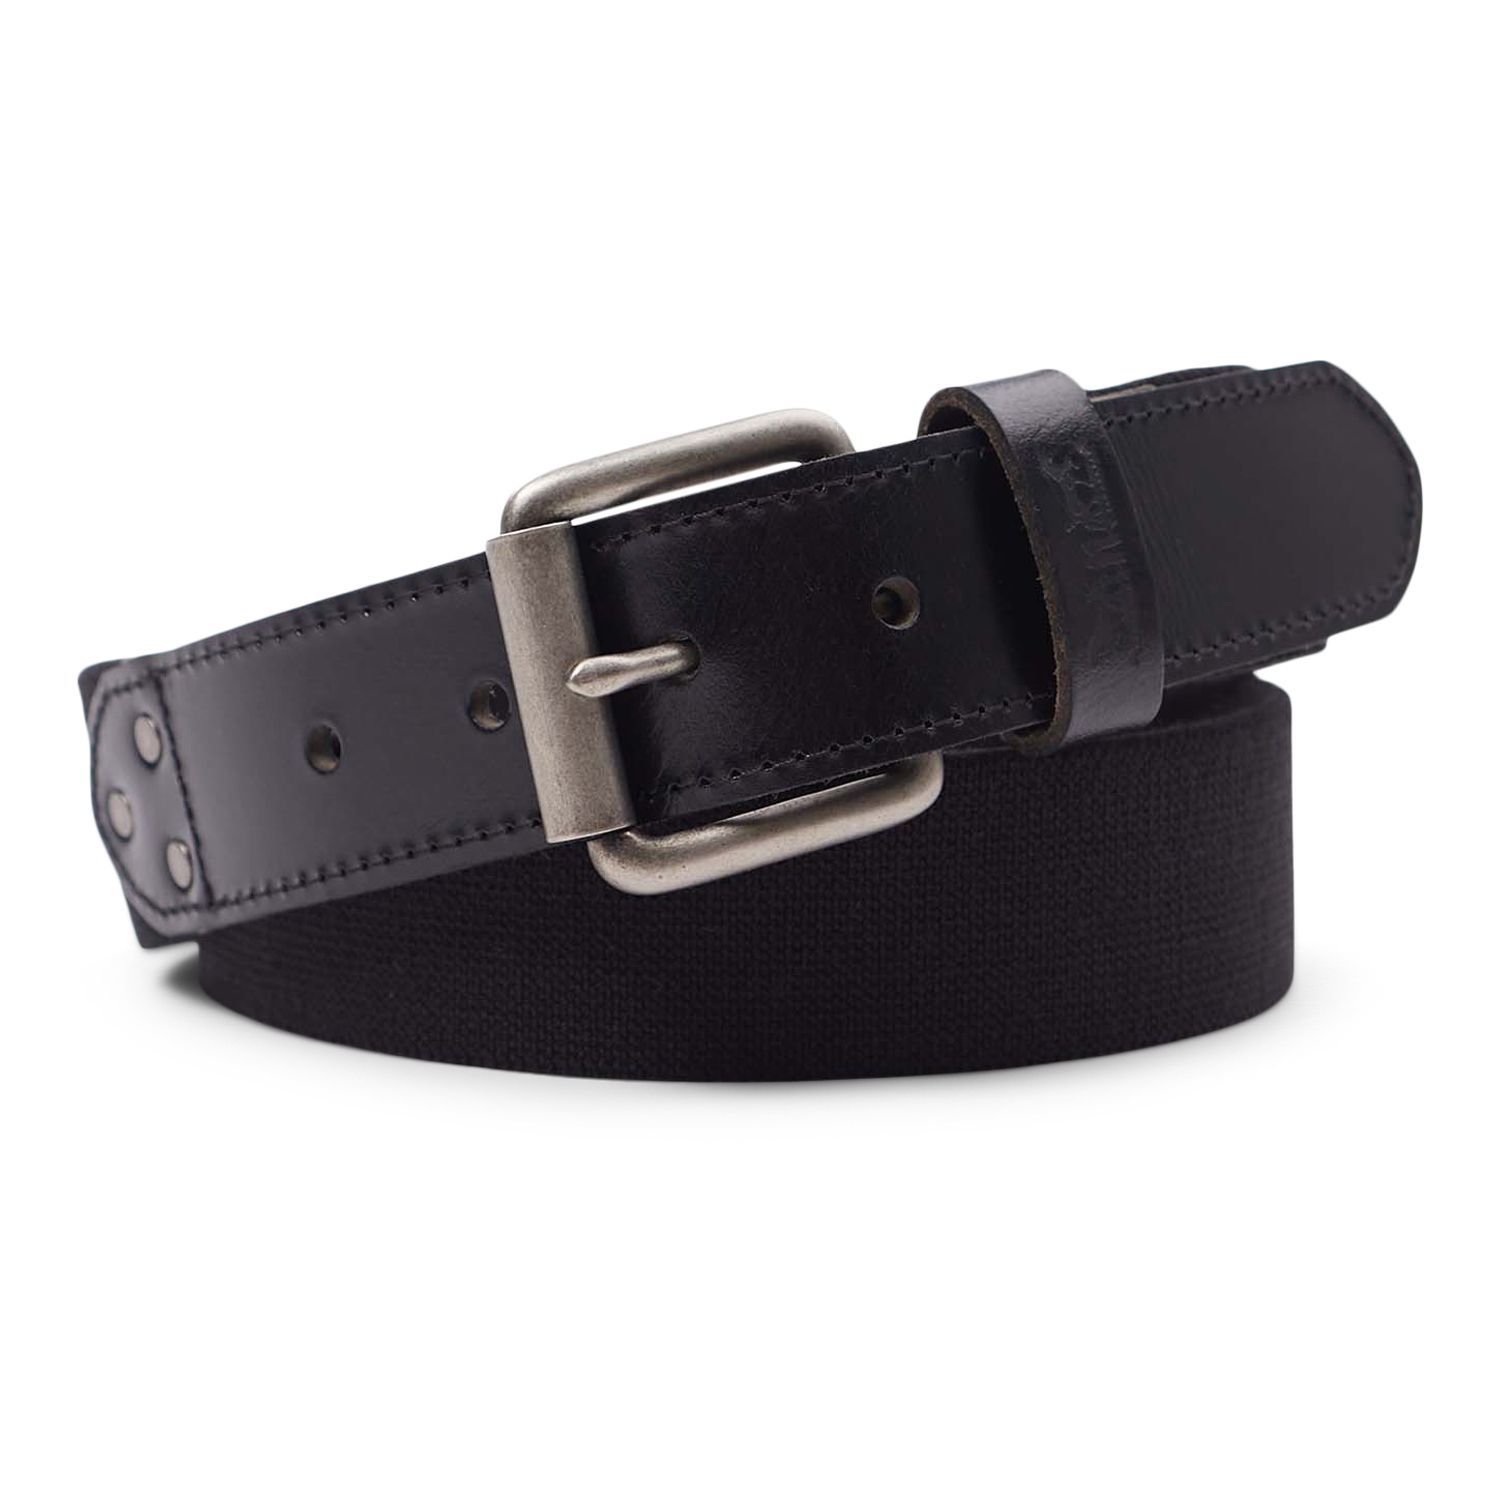 Image for Levi's Men's Casual Web Belt with Leather Trim at Kohl's.